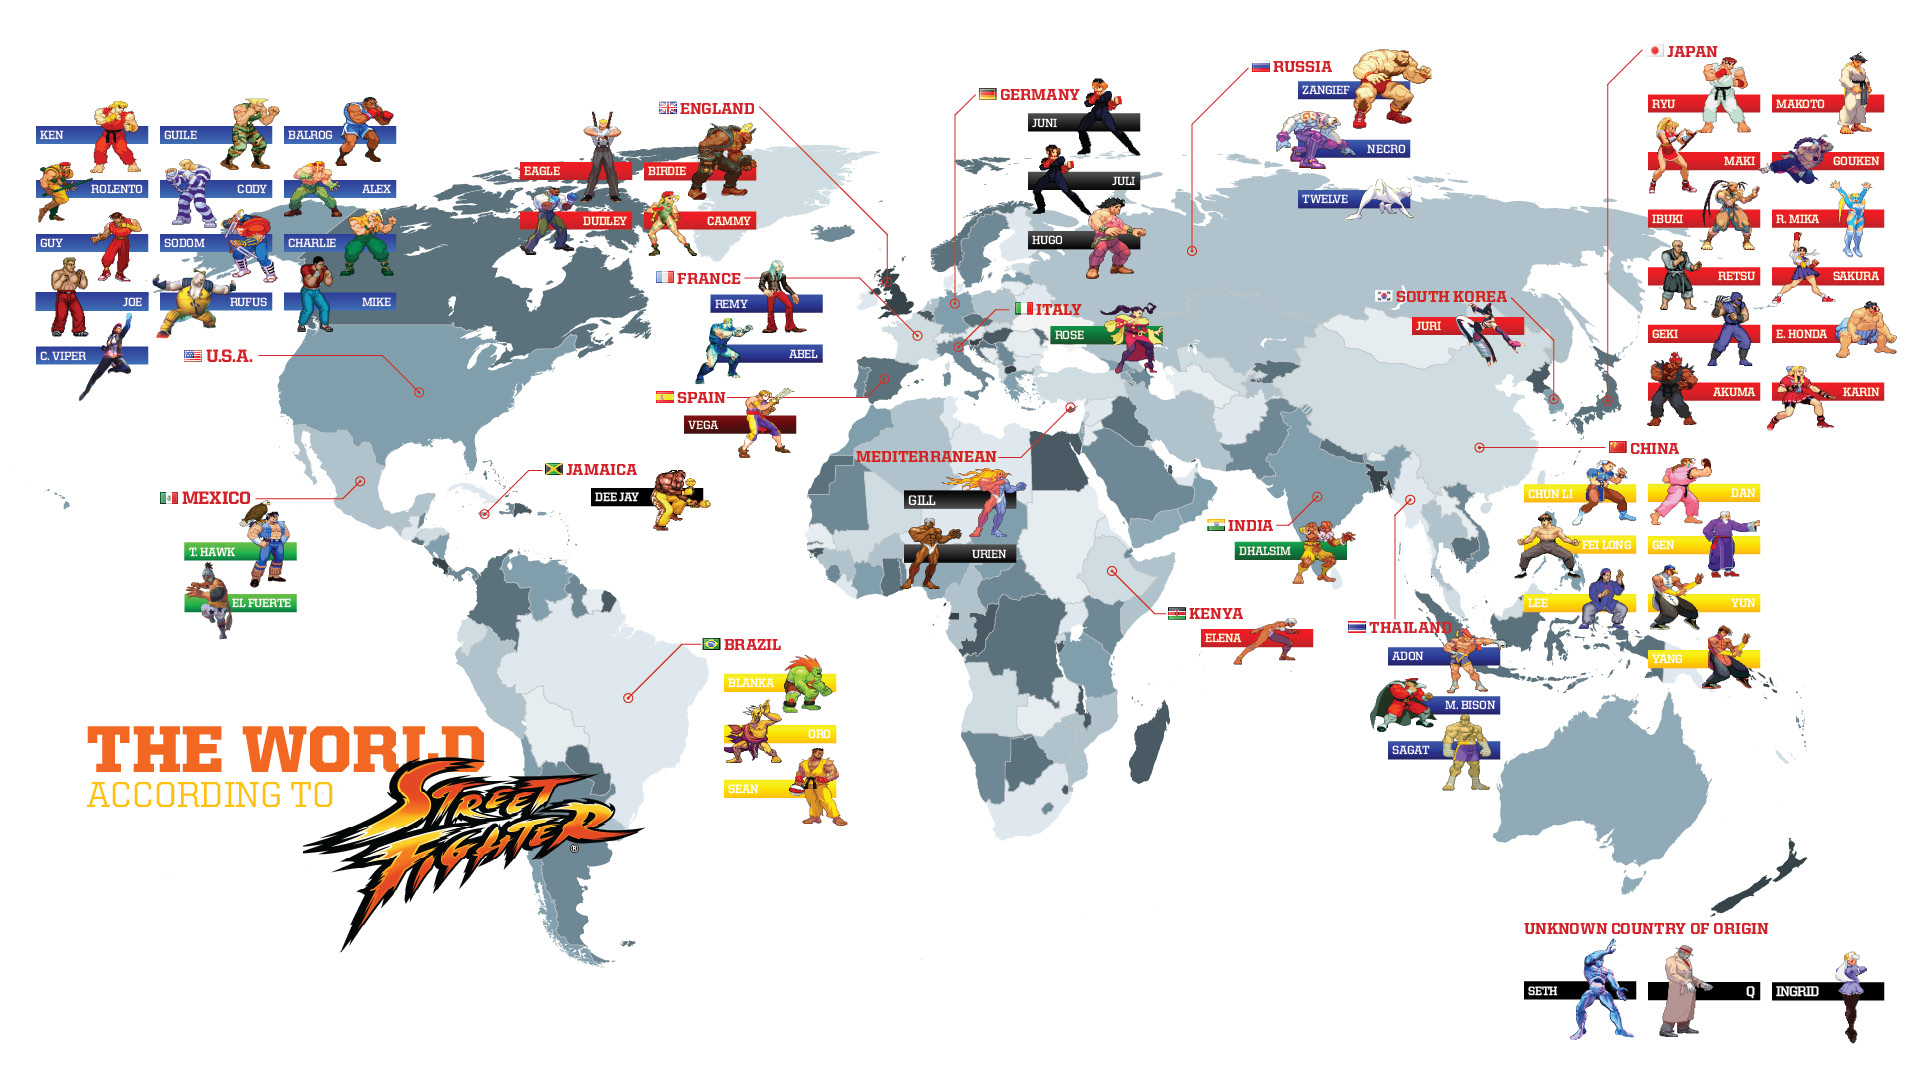 video game, street fighter, map